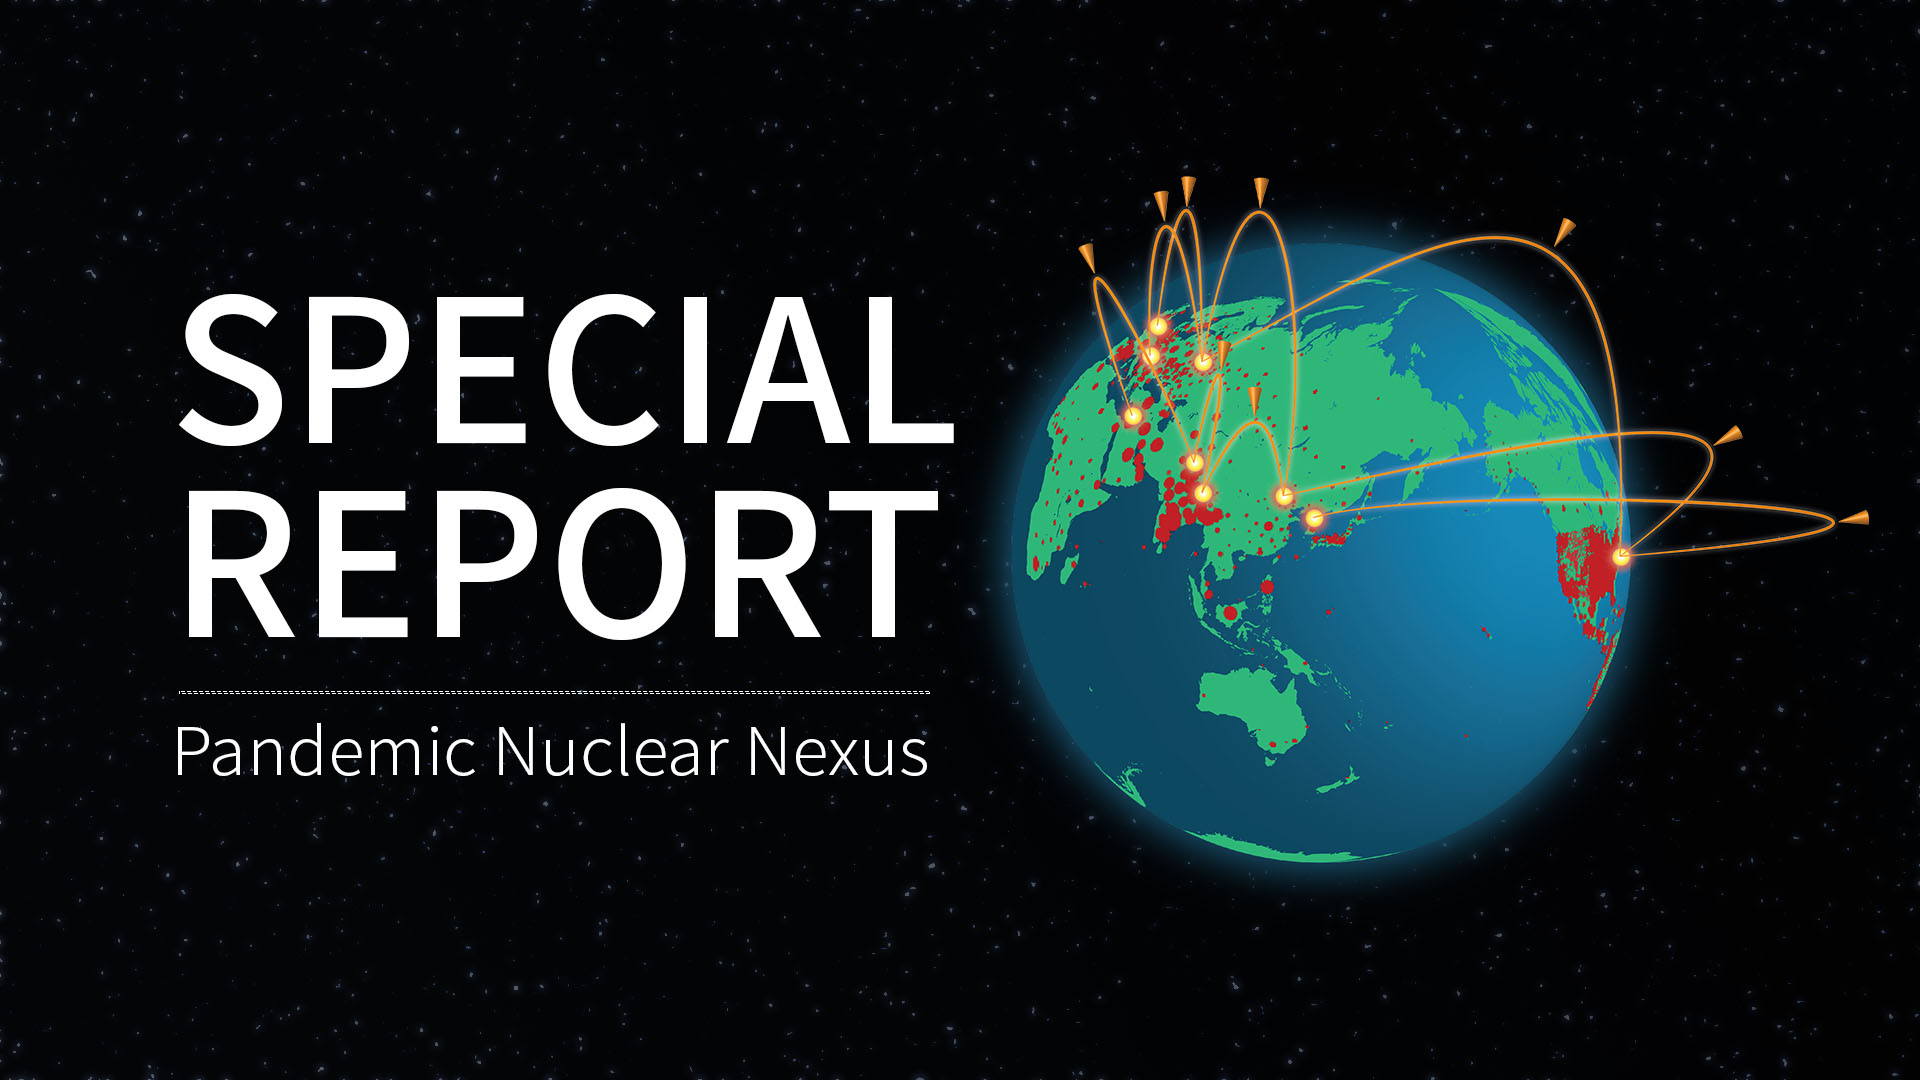 SPECIAL REPORT: Biological Weapons and Nuclear Deterrence in the Pandemic Era